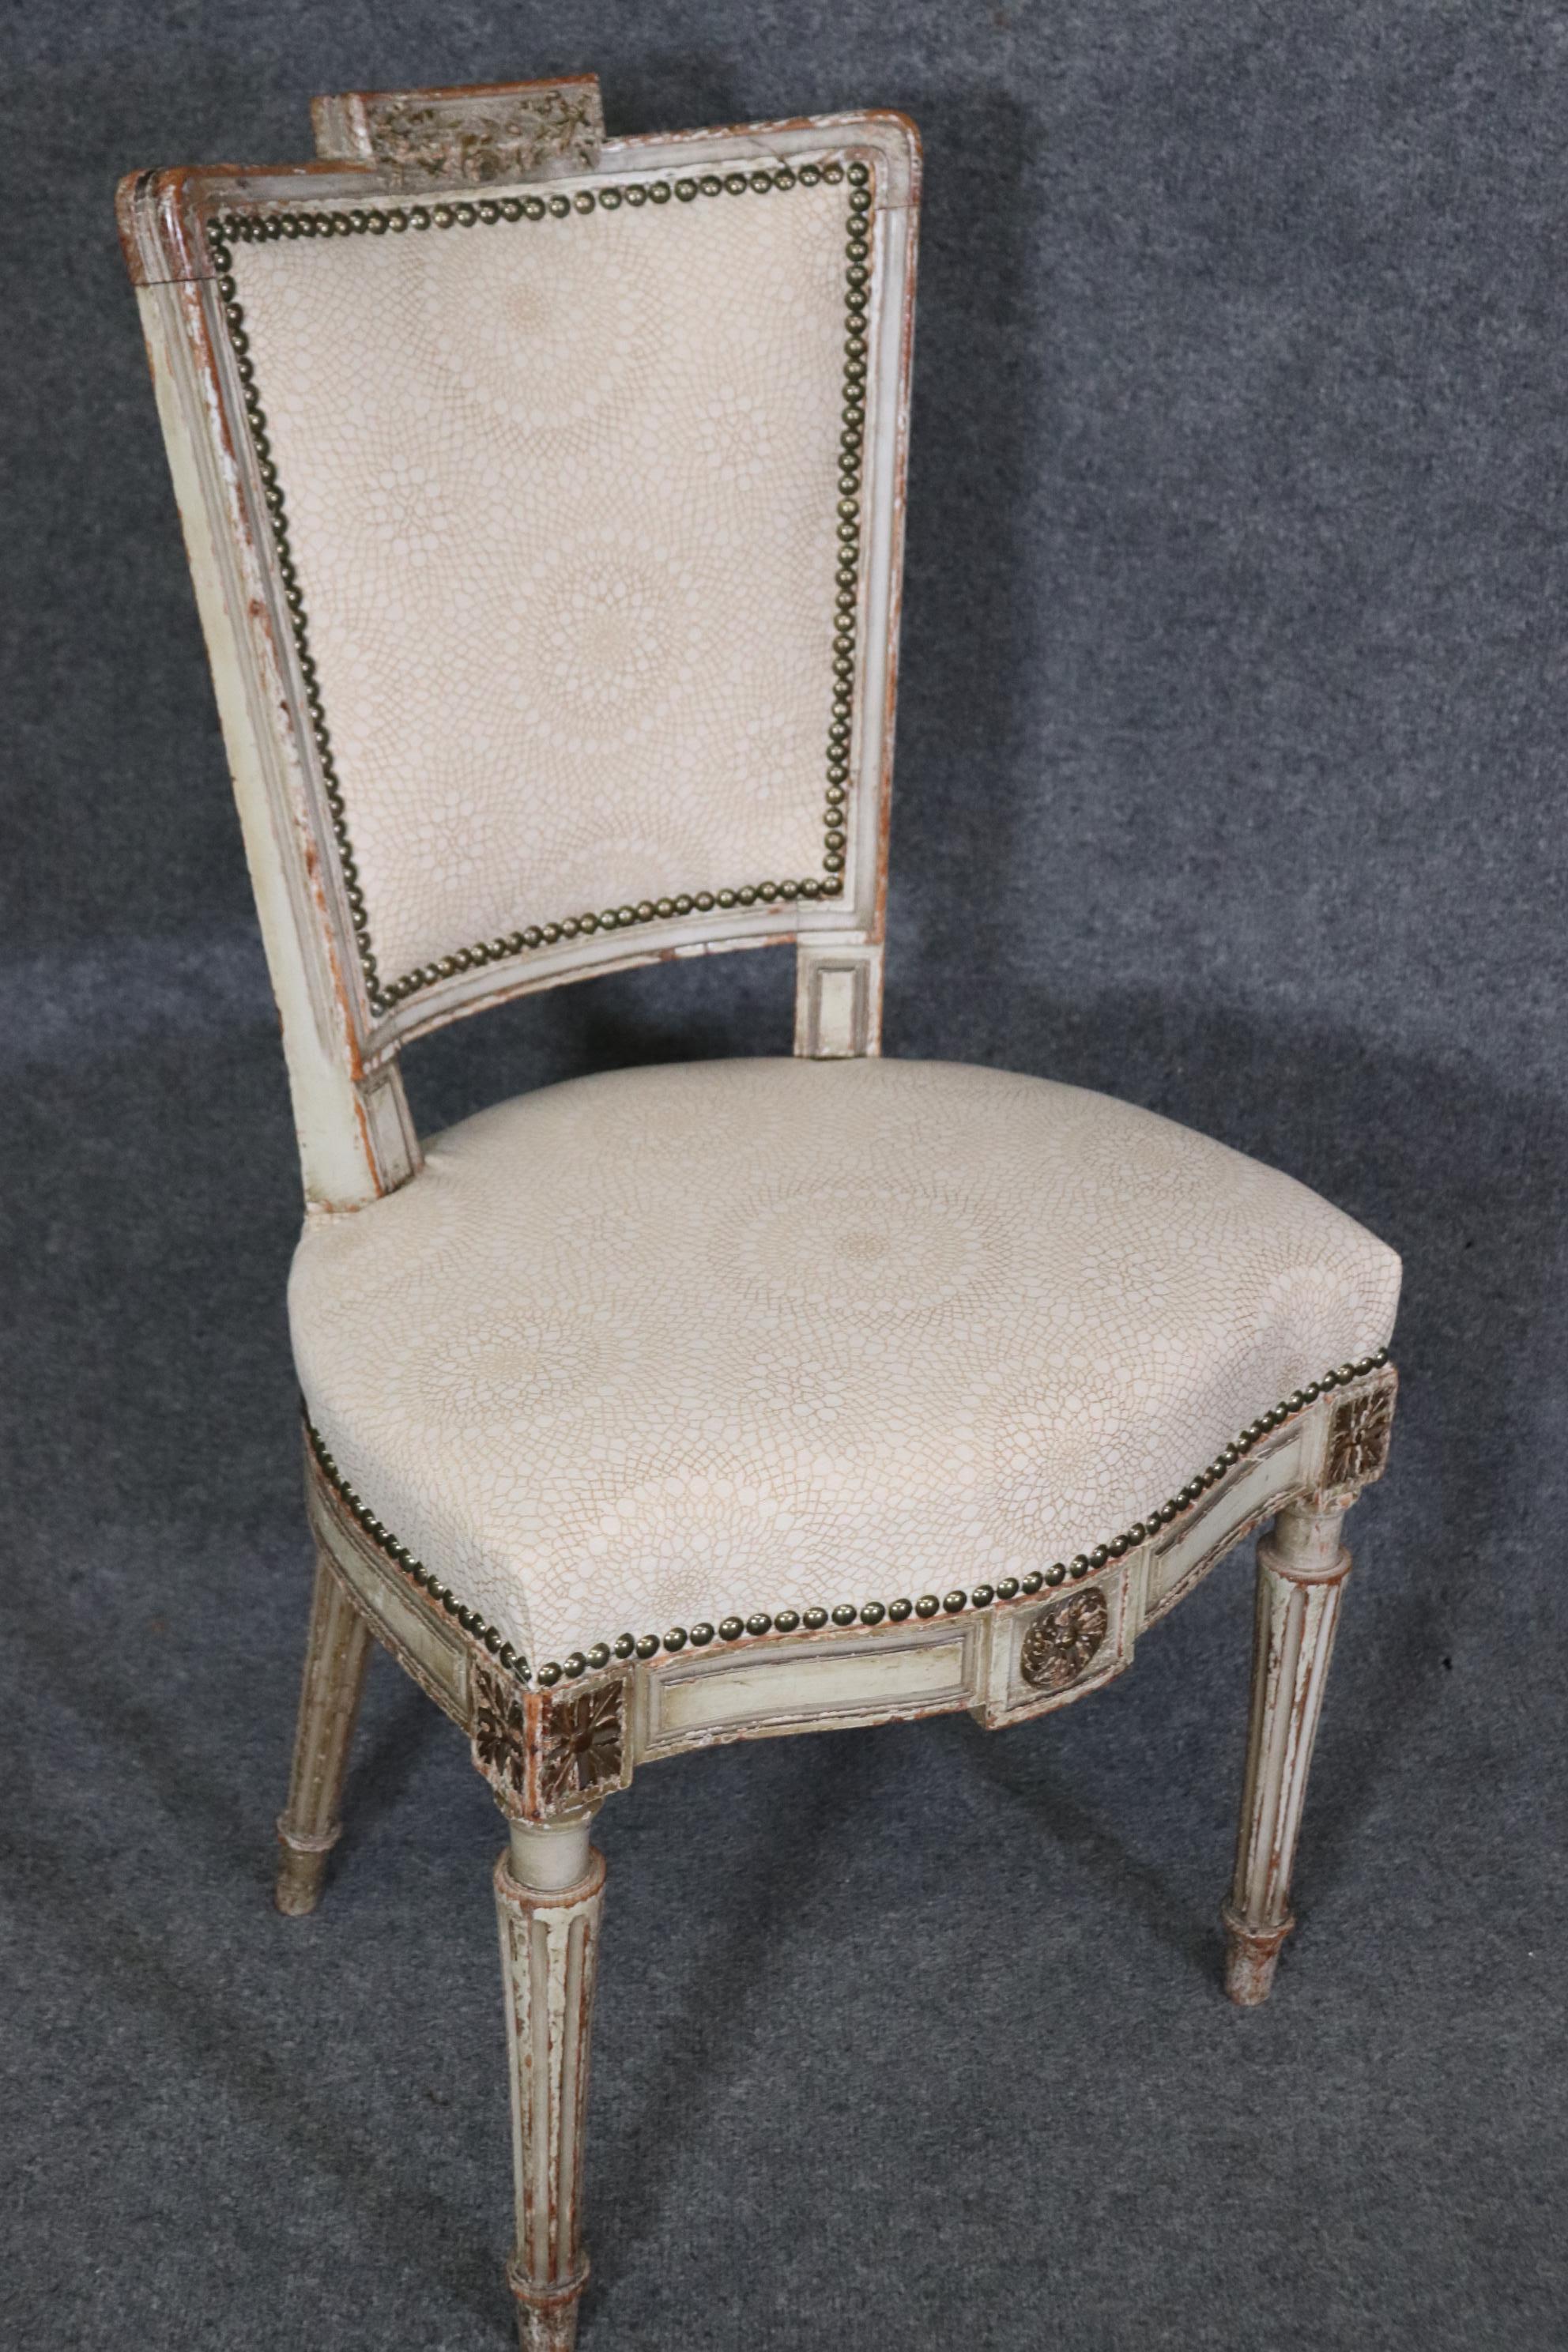 Walnut Rare Set of 12 Distressed Paint Decorated Maison Jansen Dining Chairs Circa 1920 For Sale